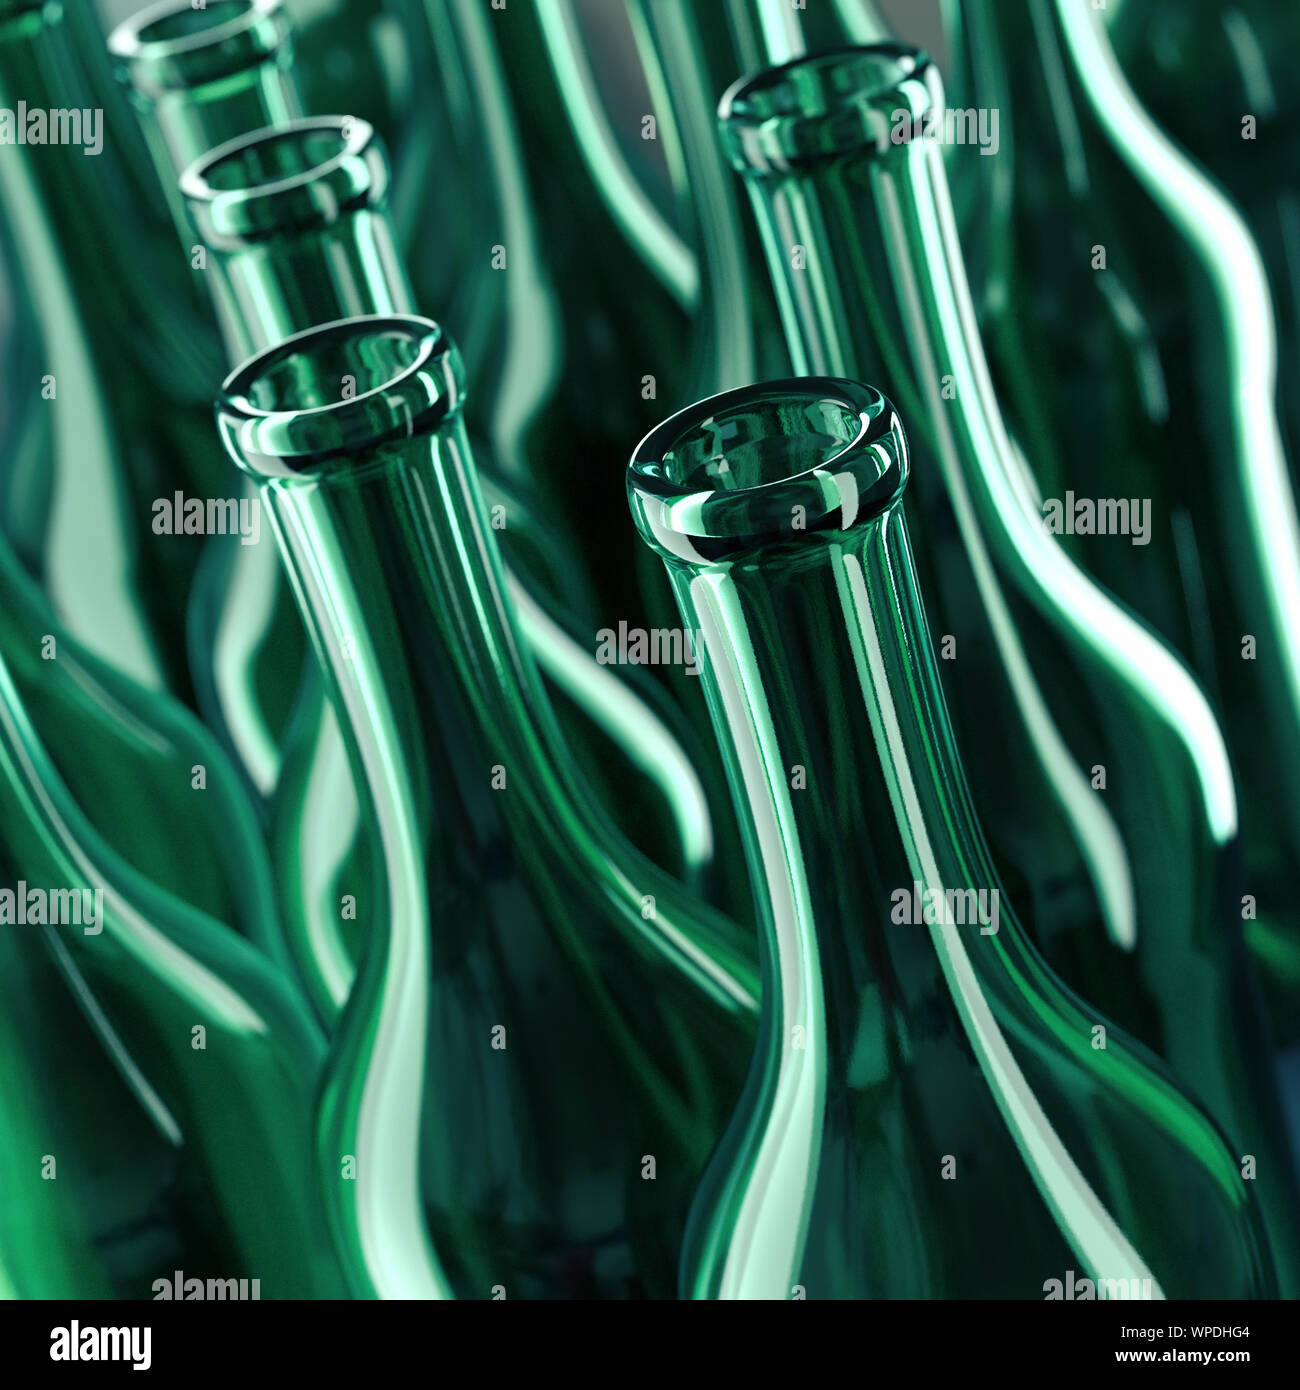 Empty green color glass bottles Stock Photo